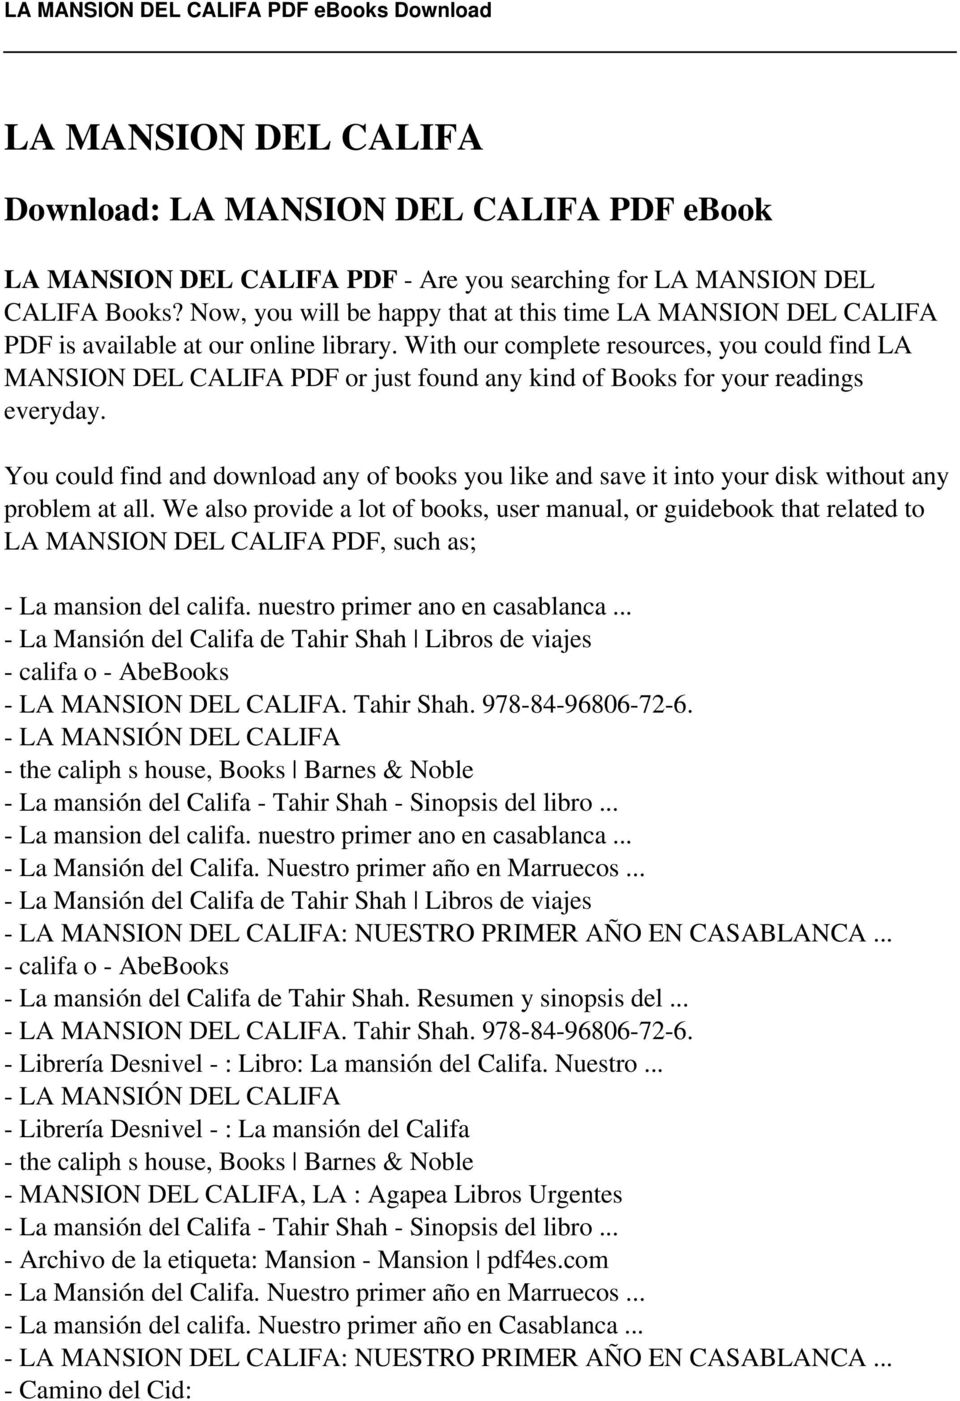 With our complete resources, you could find LA MANSION DEL CALIFA PDF or just found any kind of Books for your readings everyday.